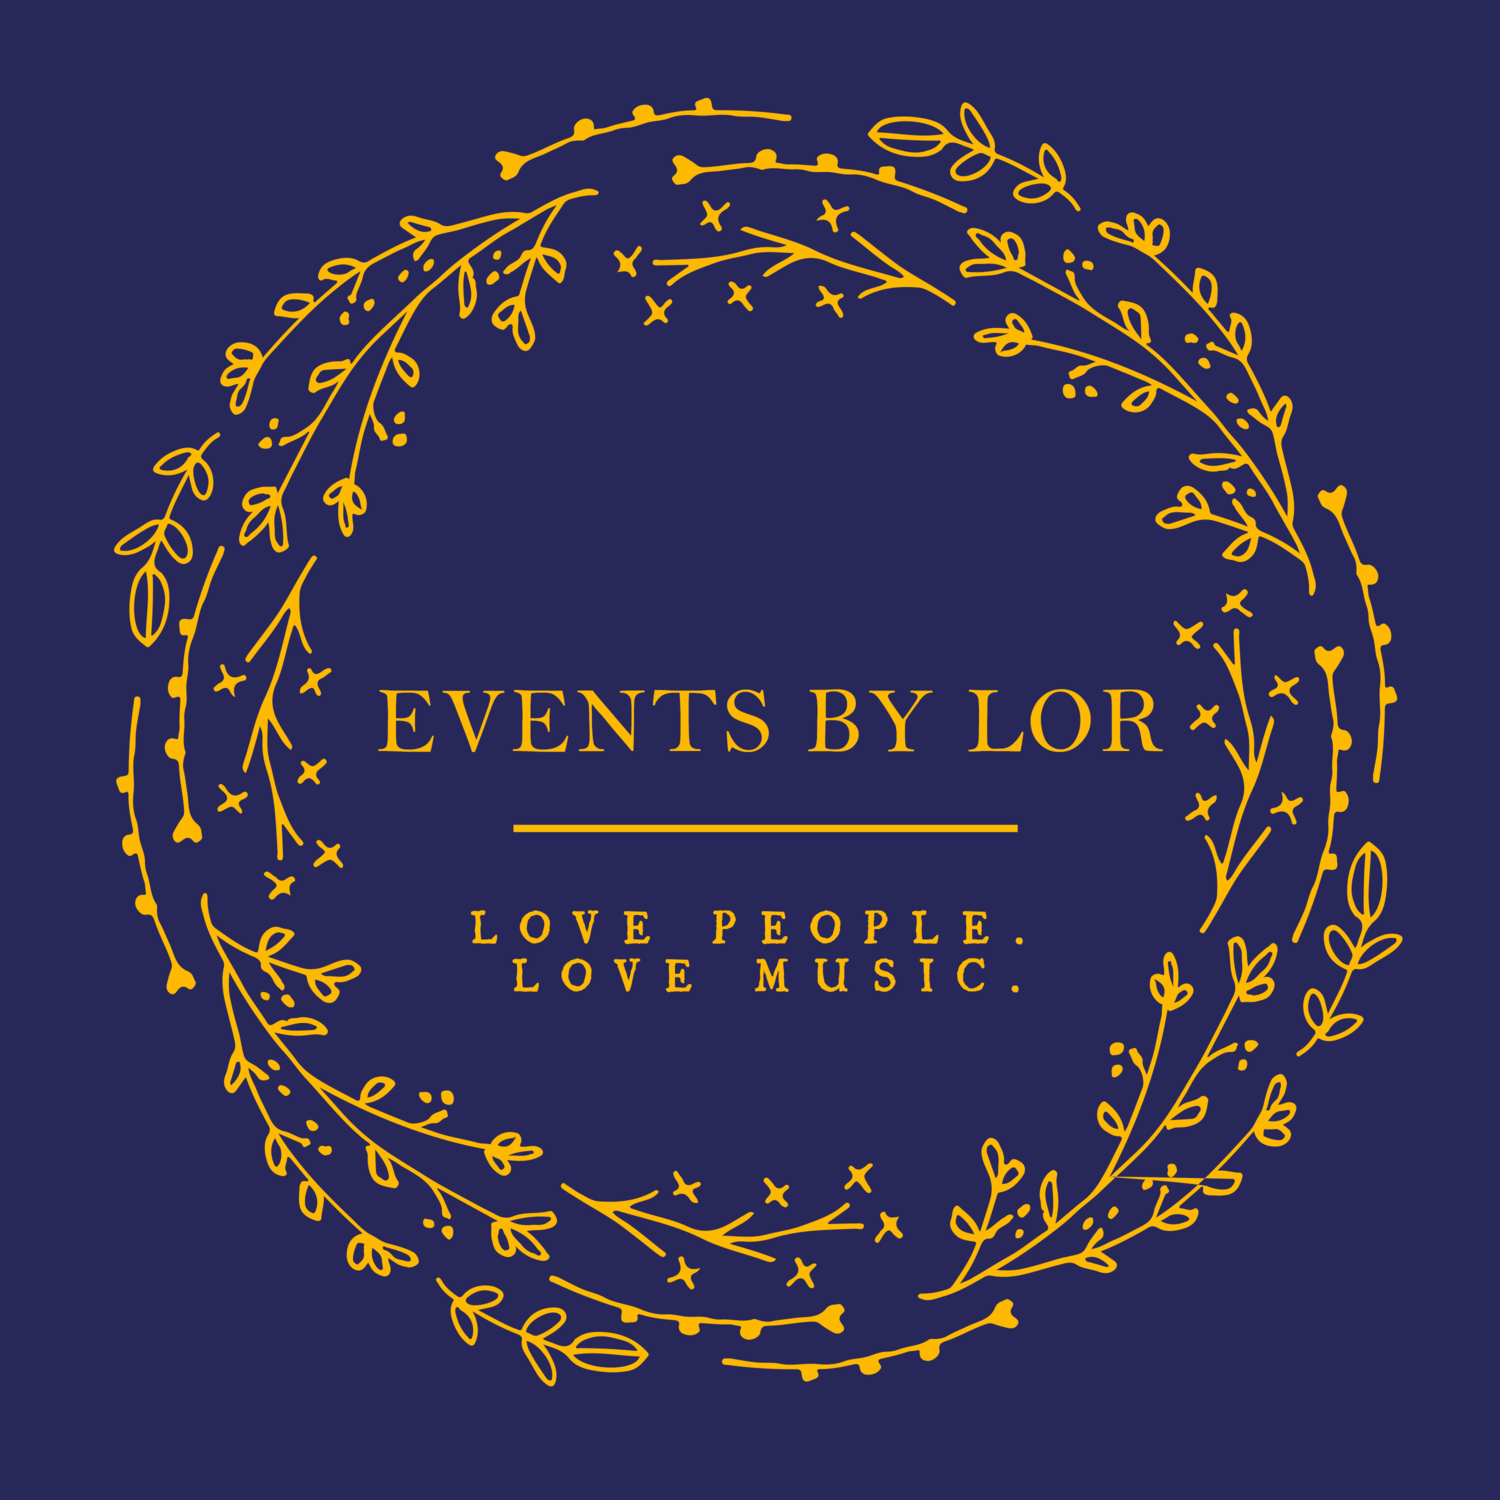 Events by Lor